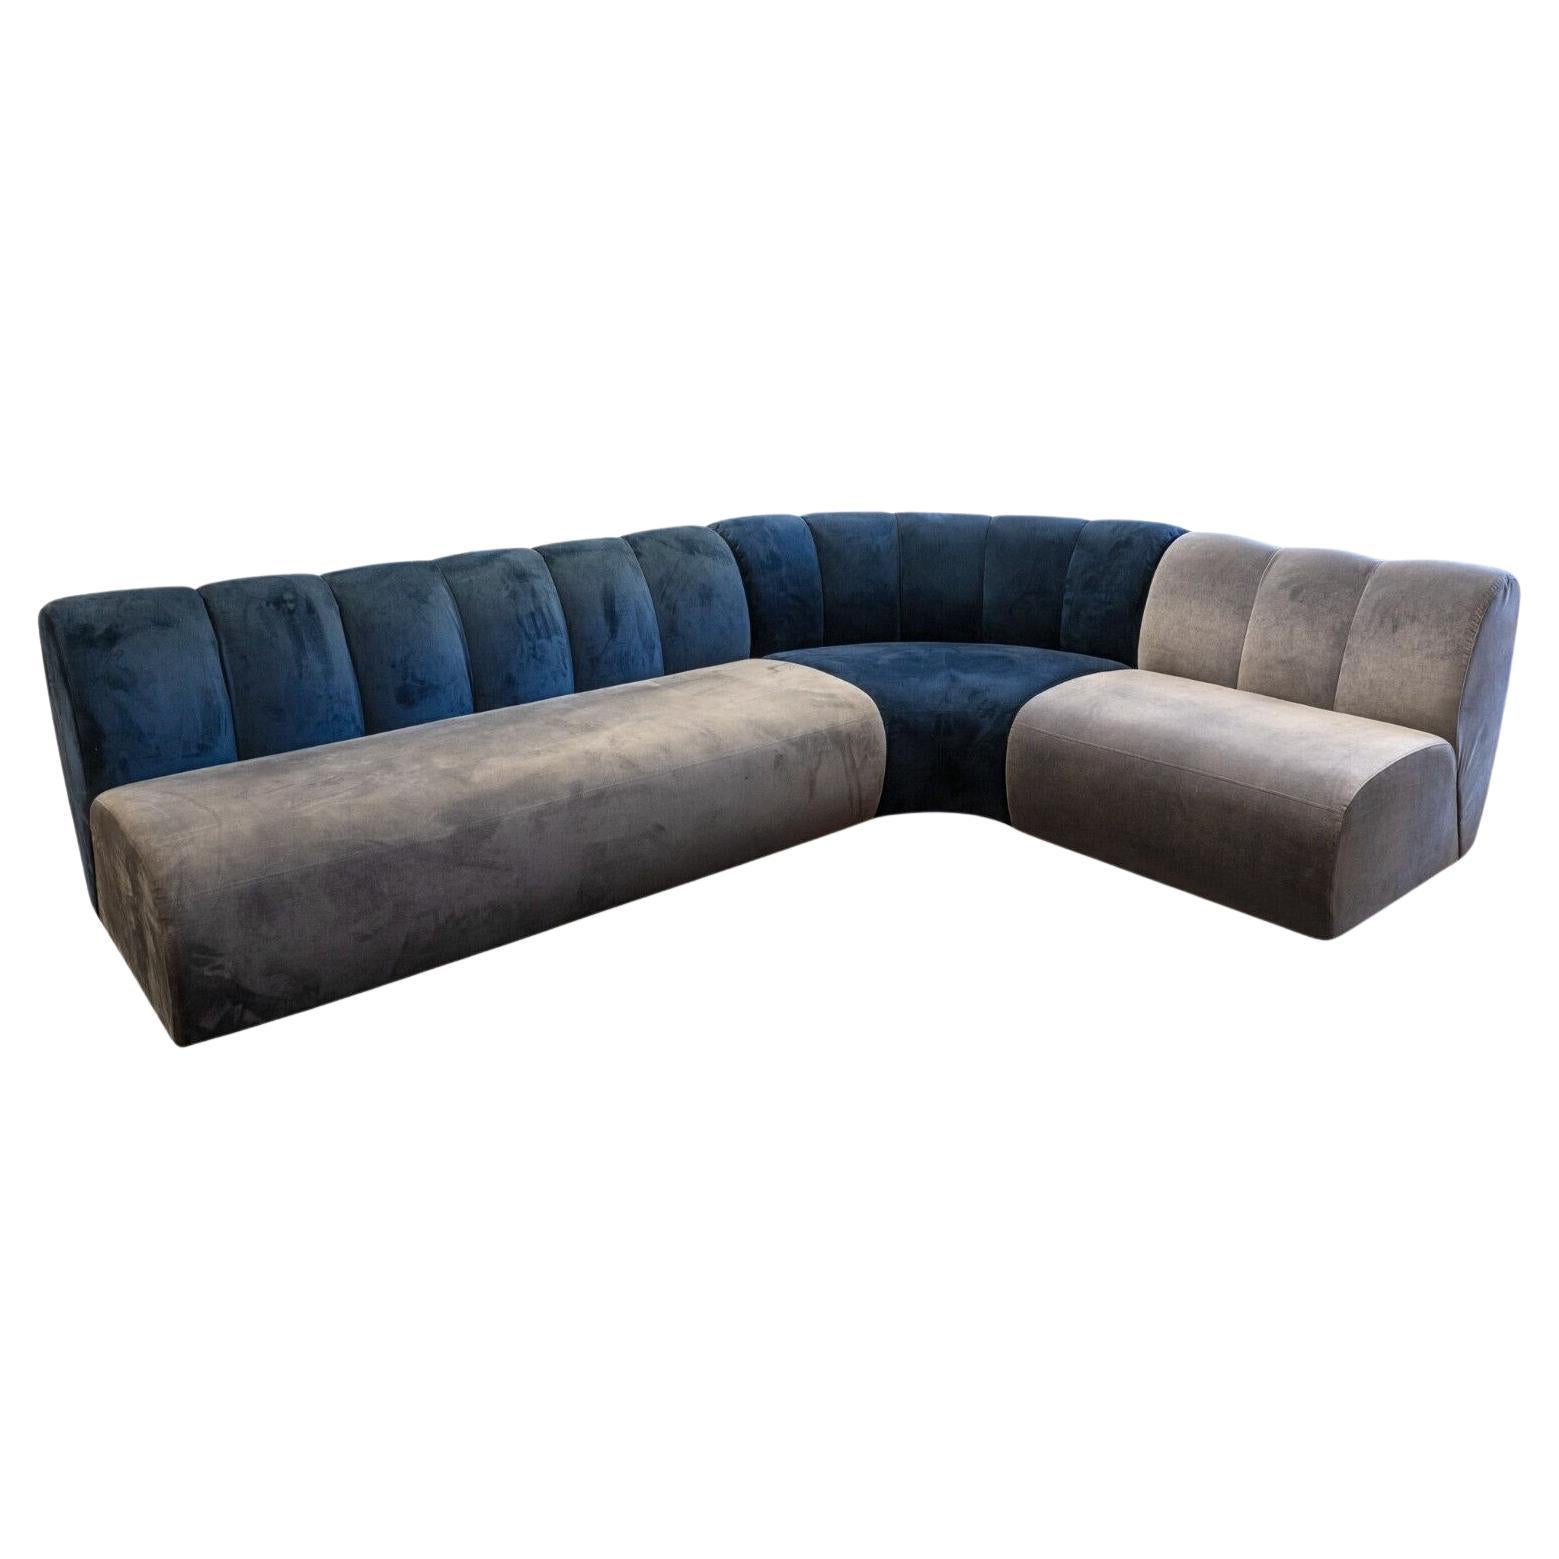 Contemporary West Elm x Steelcase Belle Prototype Navy and Grey Sectional Sofa For Sale